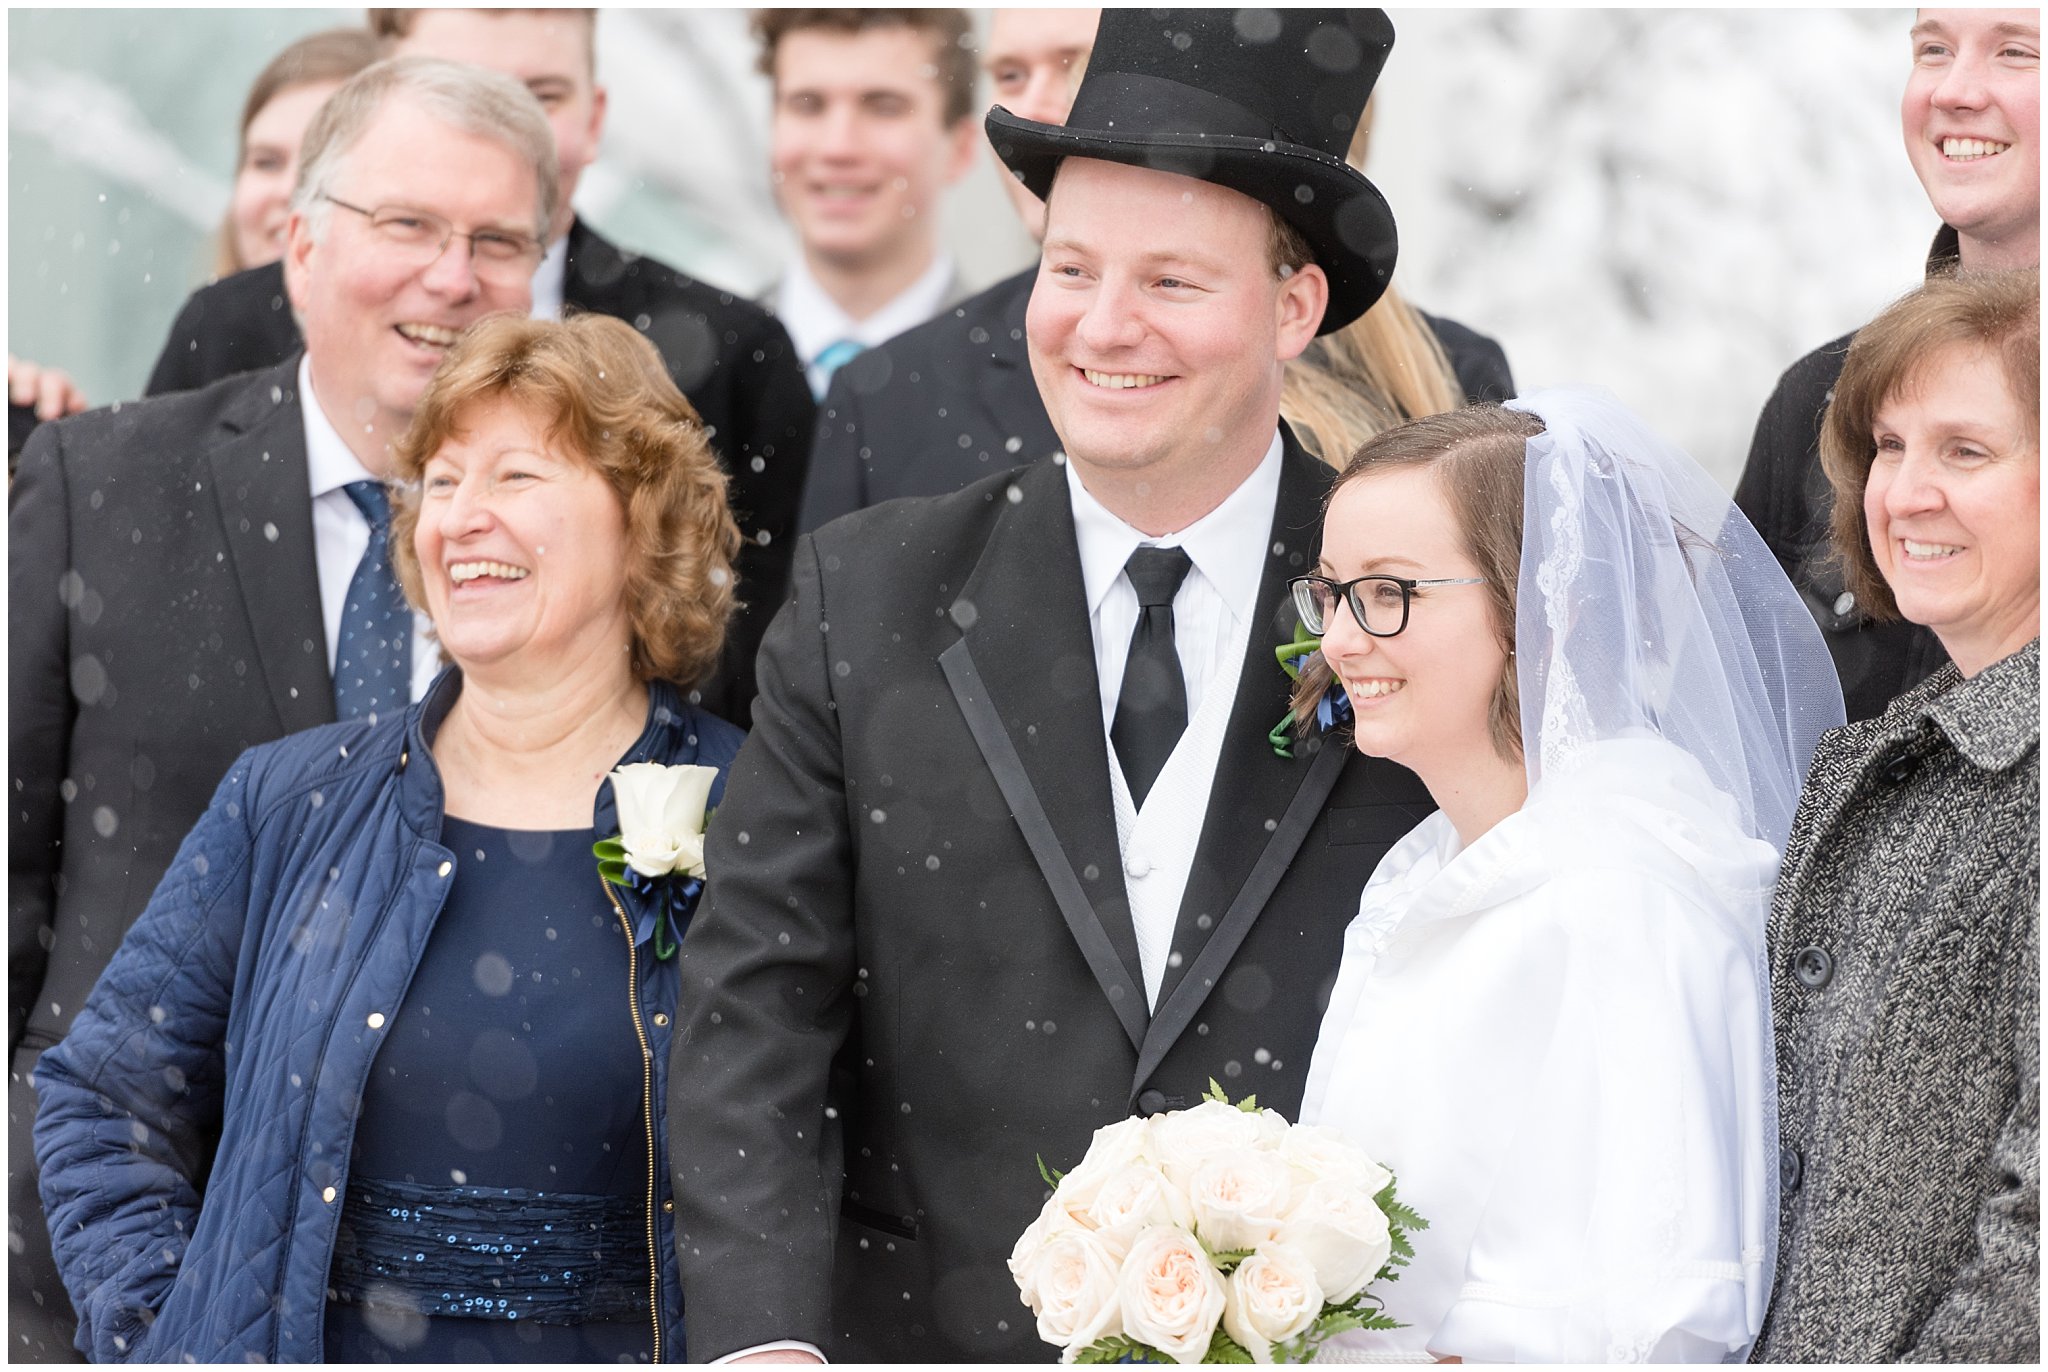 Bountiful Temple Wedding Utah | Winter wedding at the Bountiful temple | Bride and groom with family in the snow | Jessie and Dallin Photography